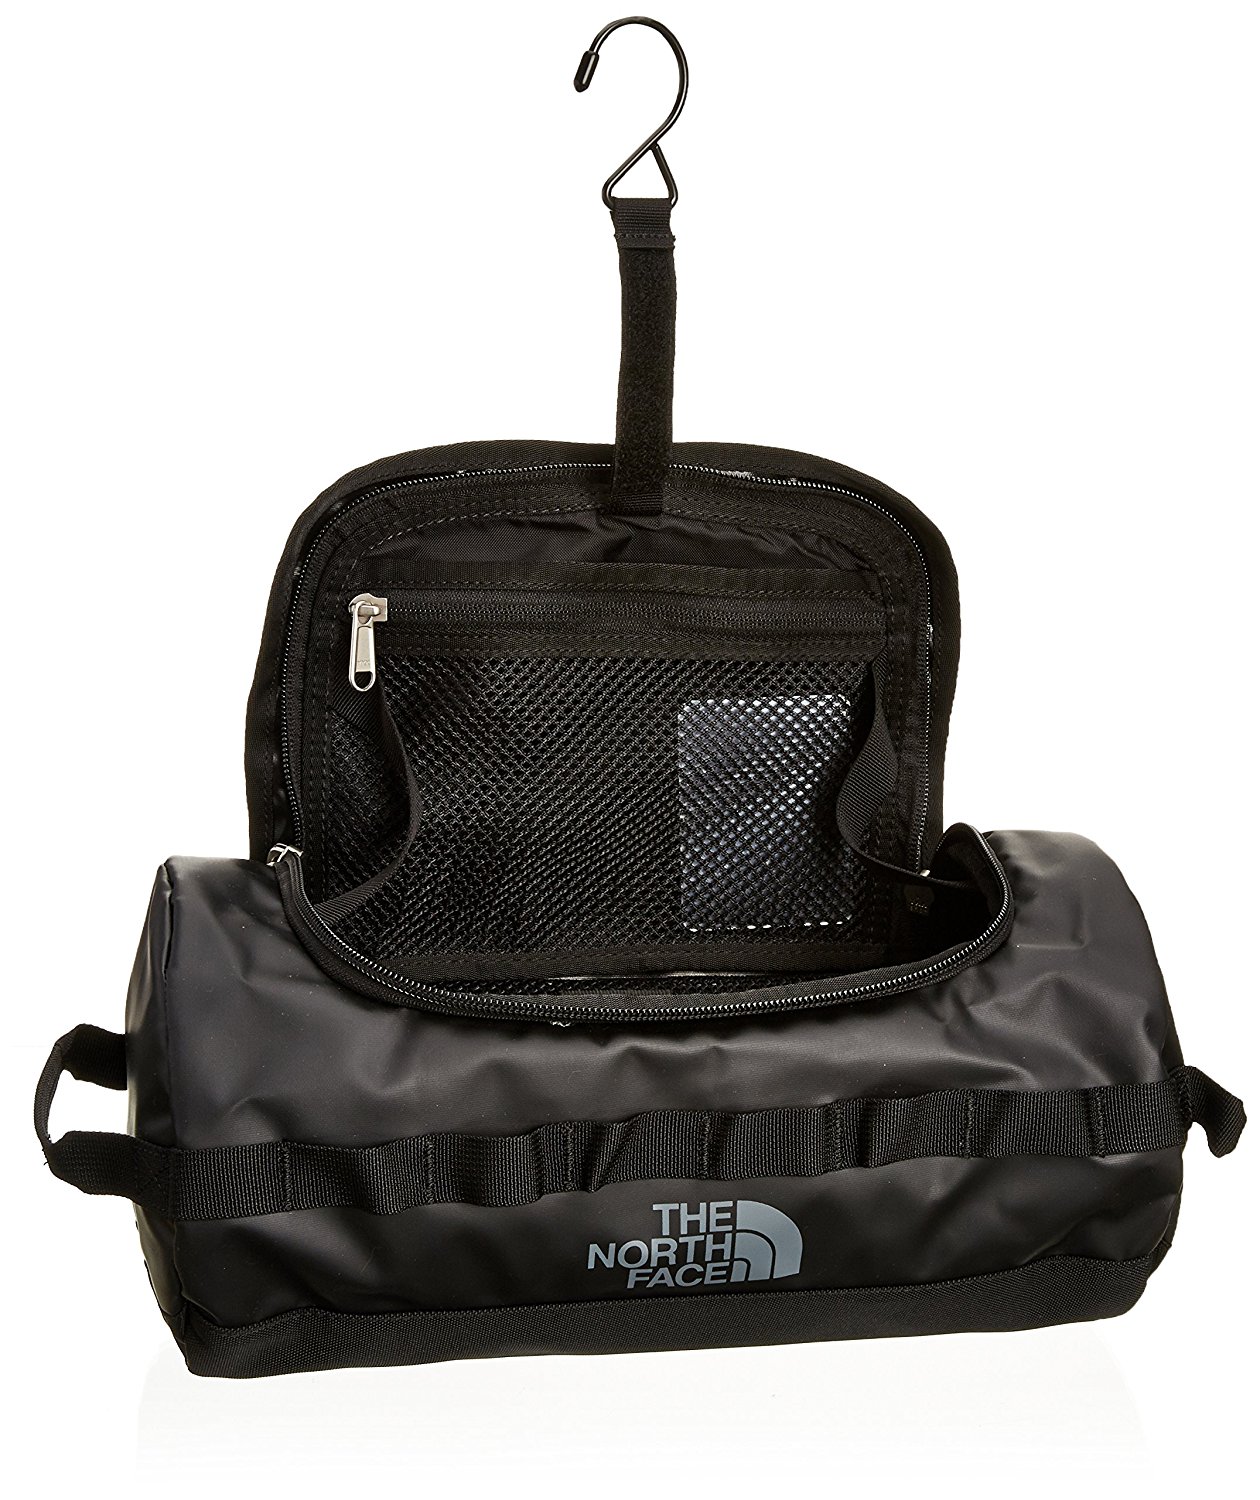 Review of The North Face BC Travel Canister